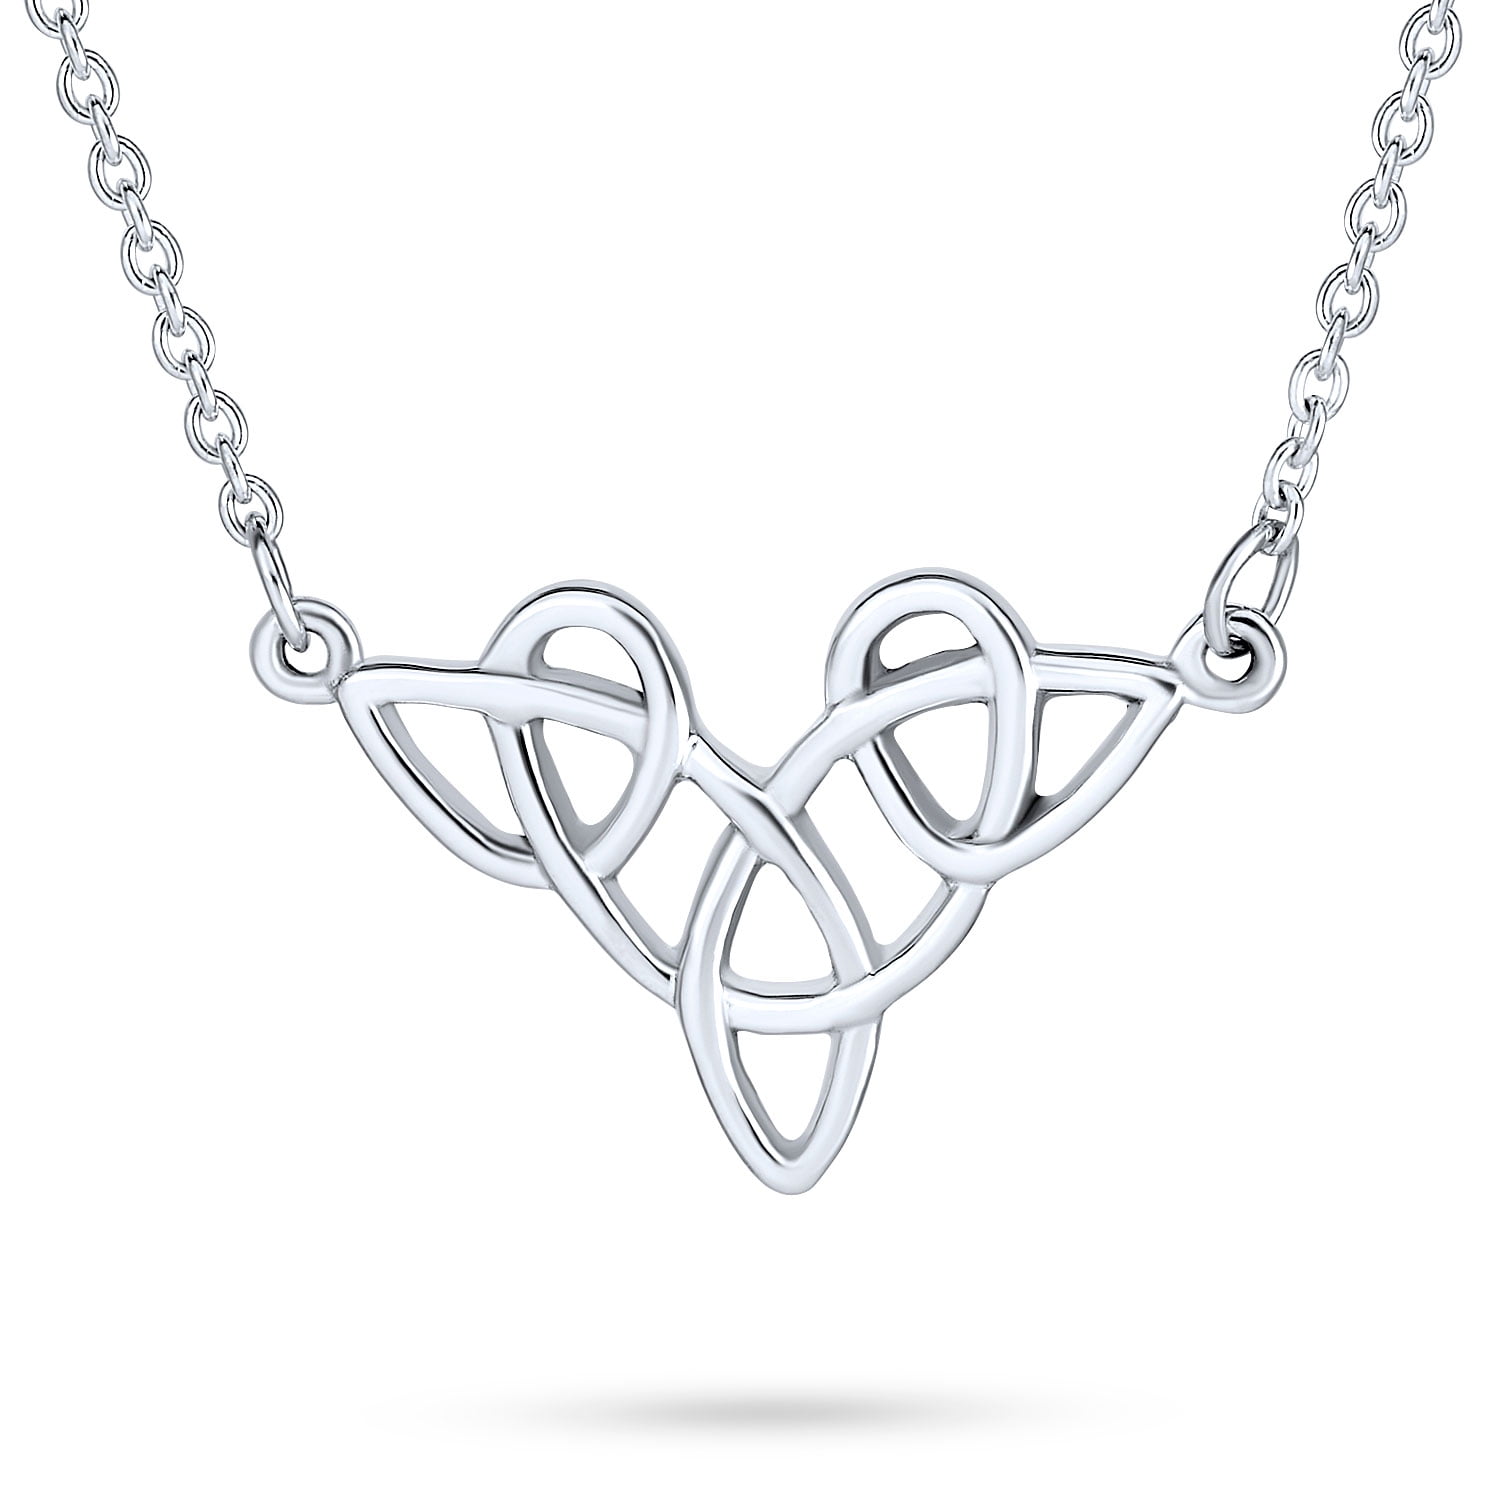 Amazon.com: Pewter Large Celtic Love Knot Pendant Rune Necklace - 1 3/8  Inch Diameter : Clothing, Shoes & Jewelry